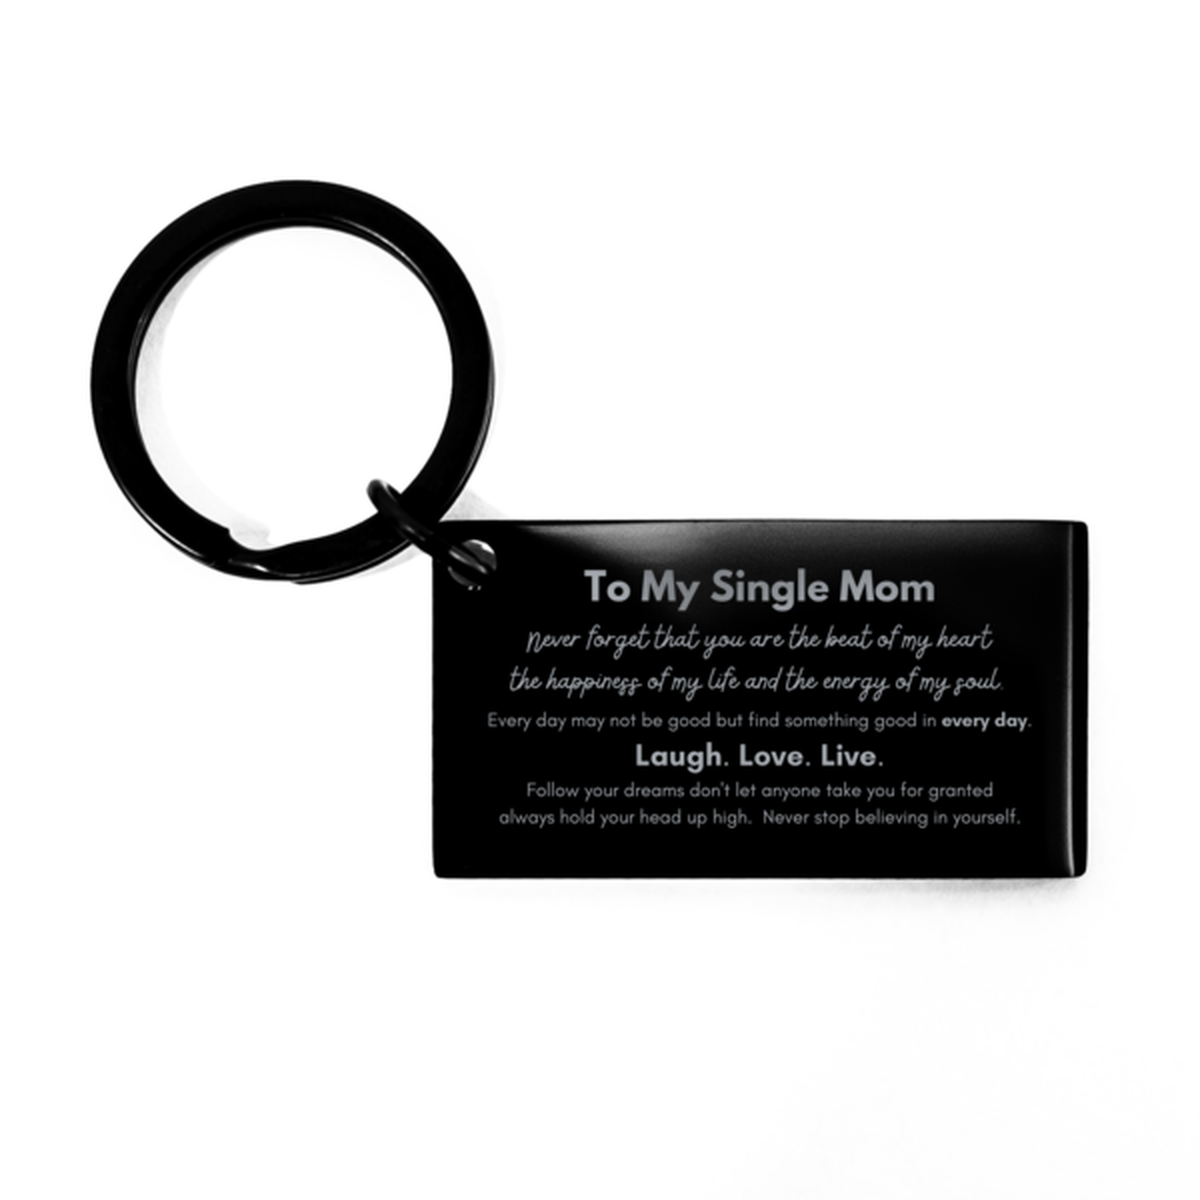 To My Single Mom Keyring Gifts, Christmas Single Mom Keychain Present, Birthday Unique Motivational For Single Mom, To My Single Mom Never forget that you are the beat of my heart the happiness of my life and the energy of my soul